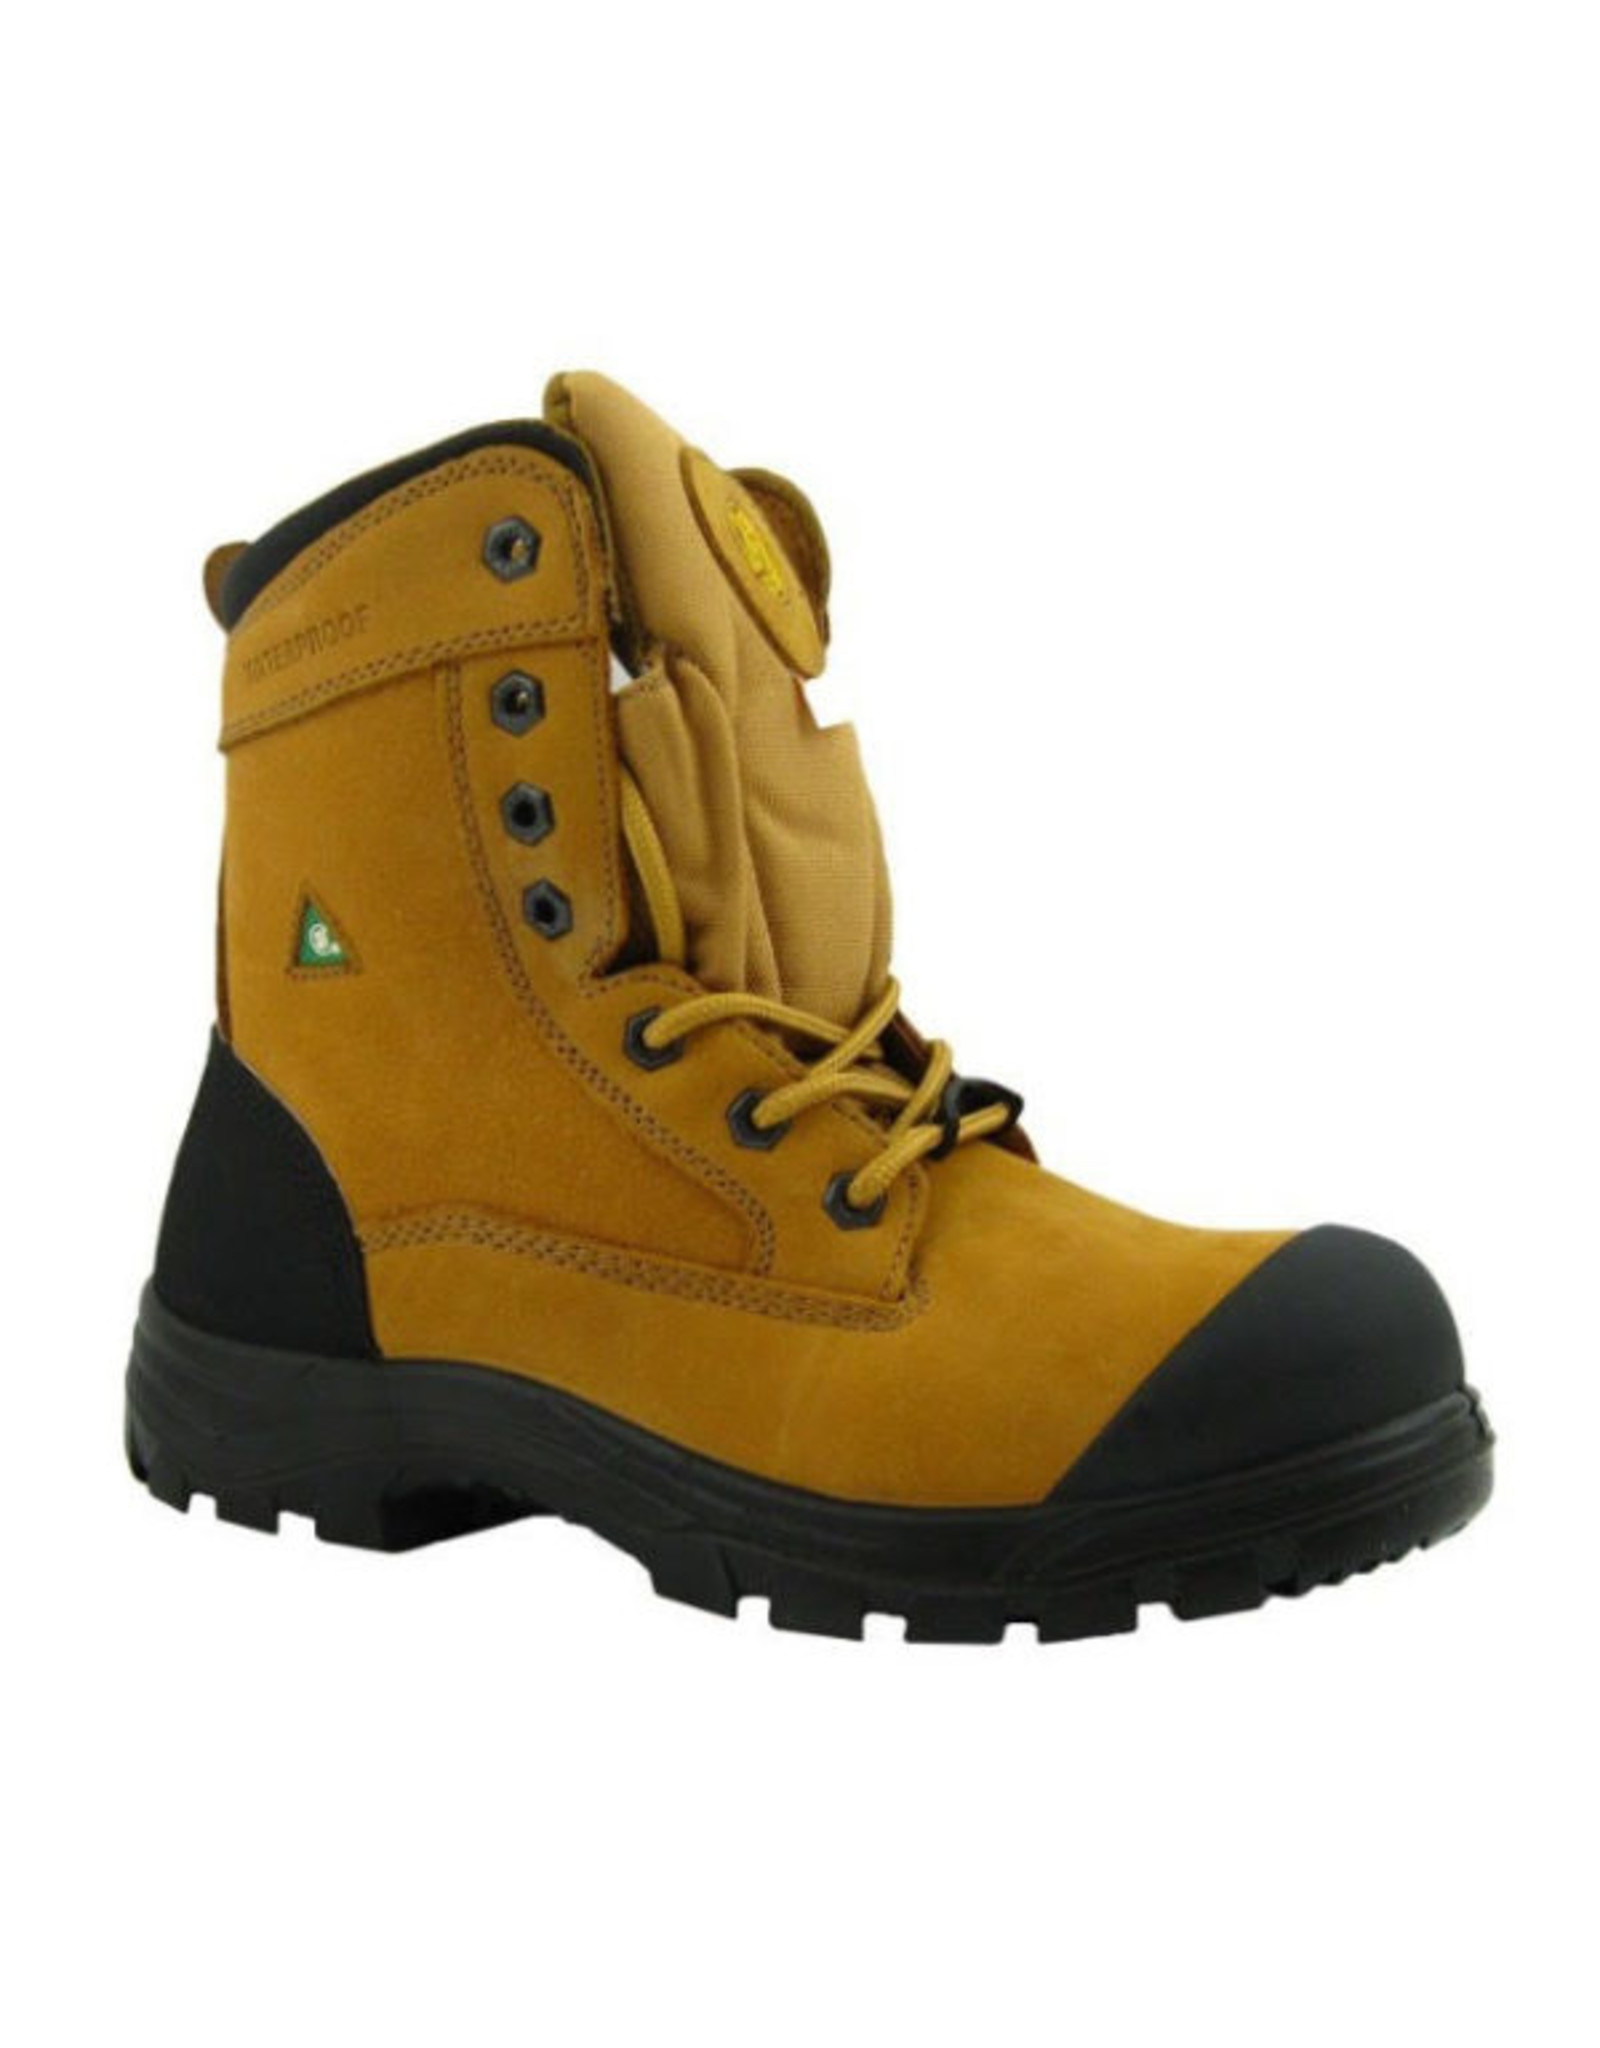 TIGER SAFETY TIGER 7888-W SAFETY BOOT